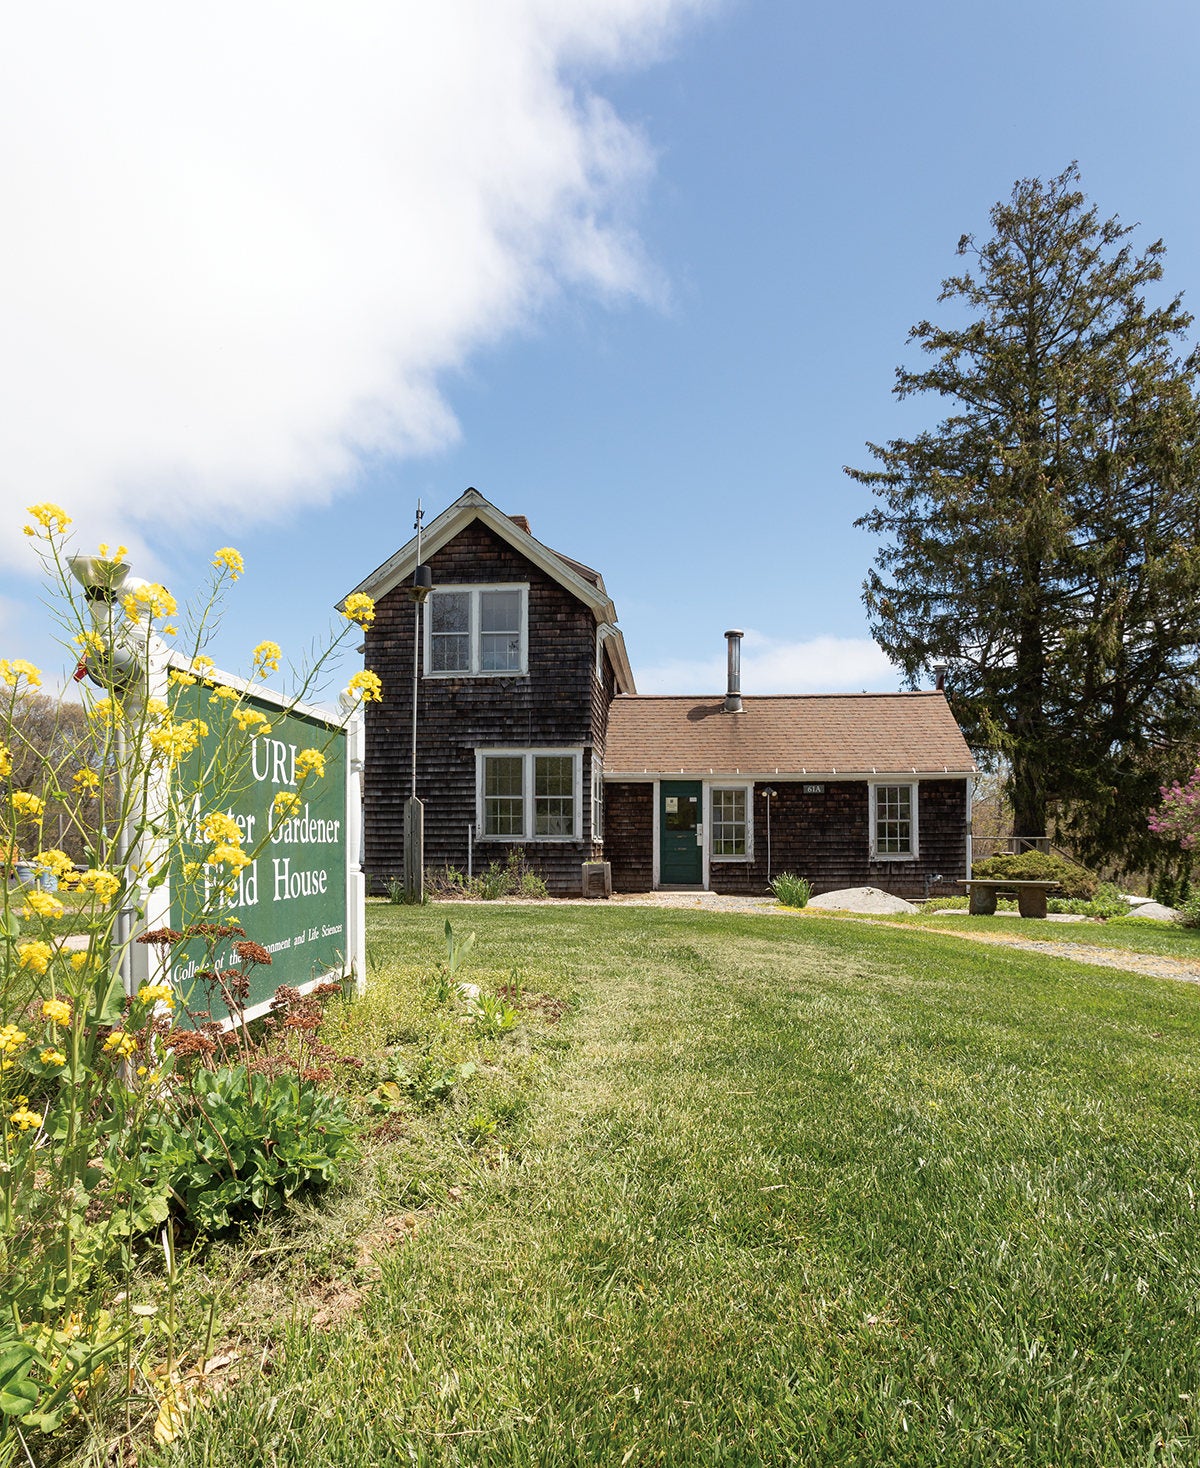 The URI Master Gardener Field House with flowers decorating the sign